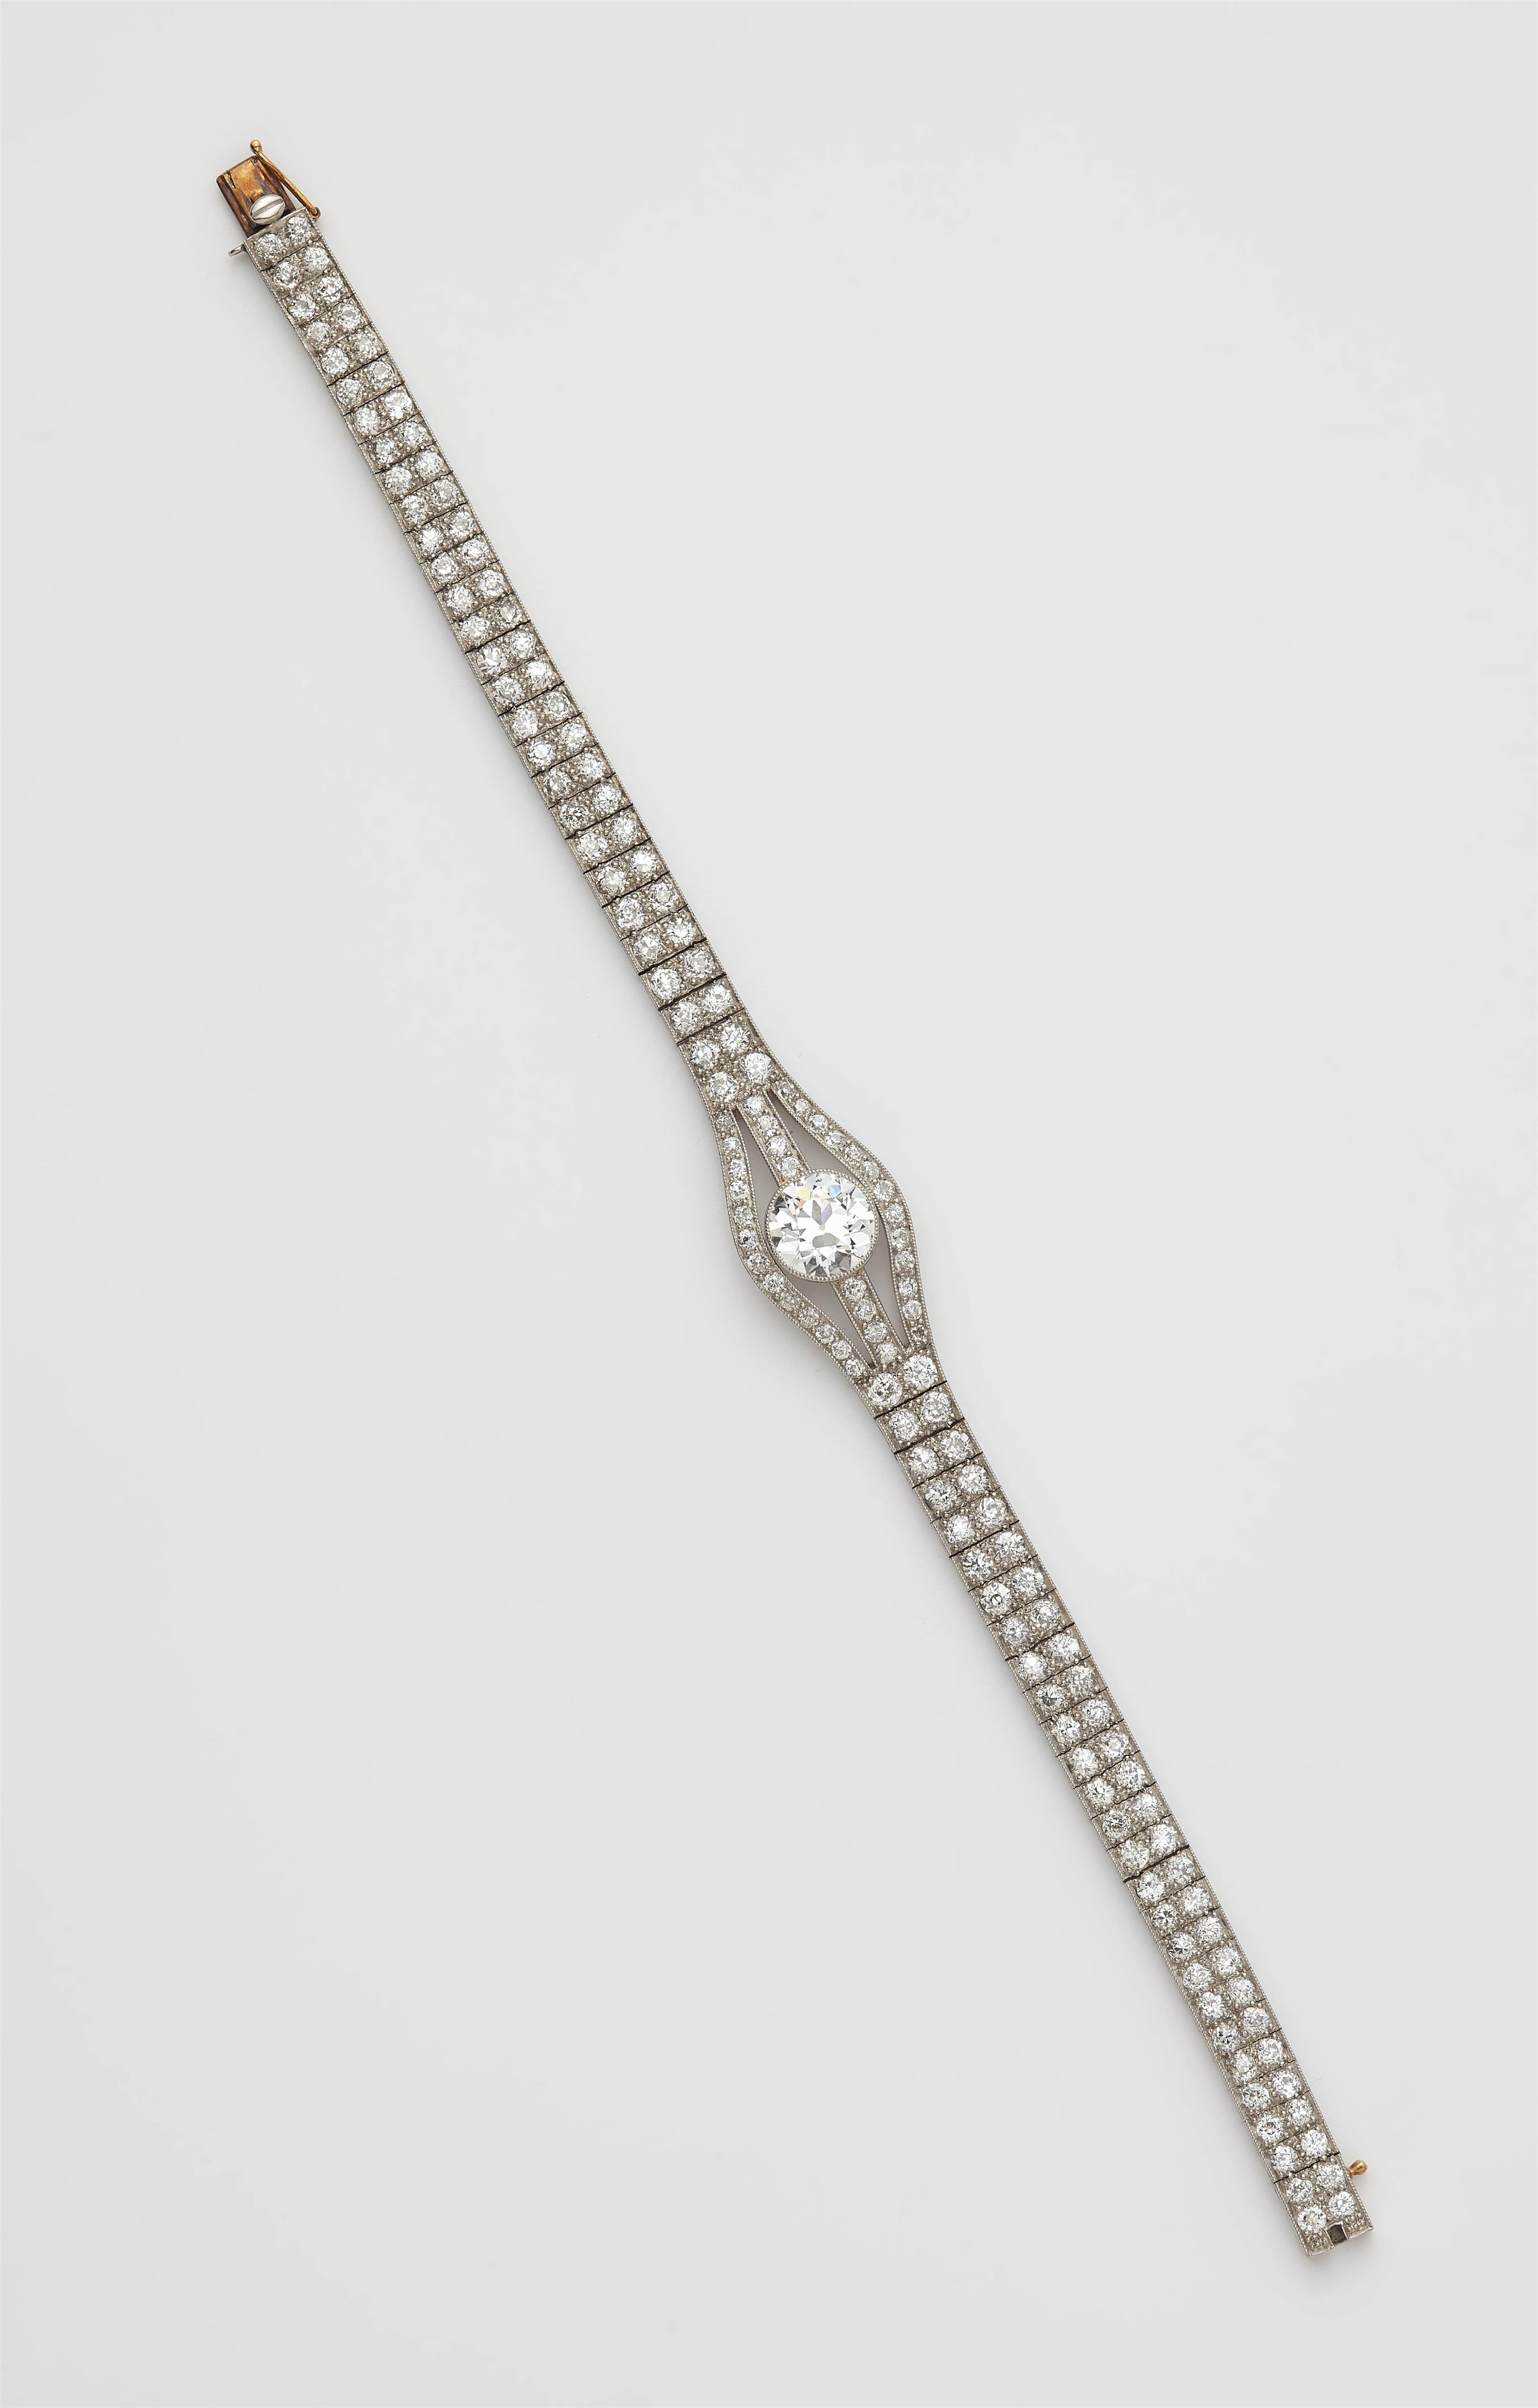 An Art Deco platinum and diamond bracelet with a transition-cut diamond solitaire of ca. 2.15 ct. - image-1